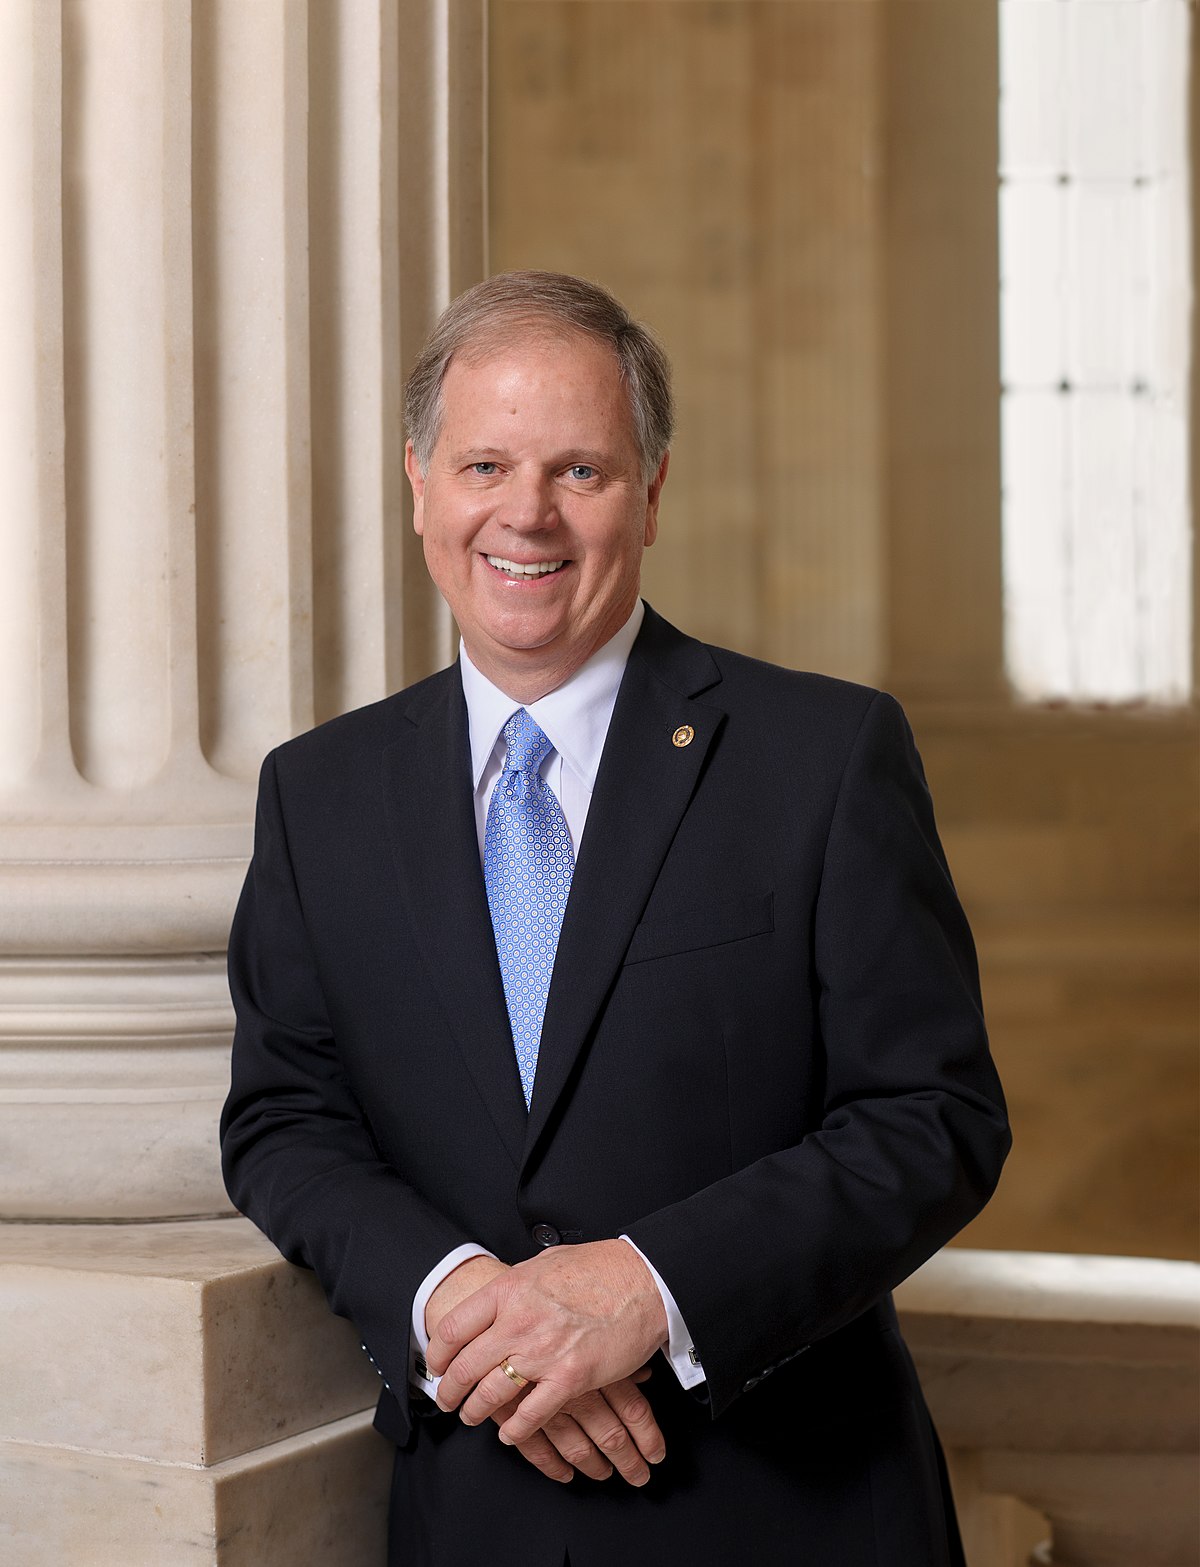 Sen. Doug Jones leads colleagues in new push to renew funding for minority- serving institutions of higher education